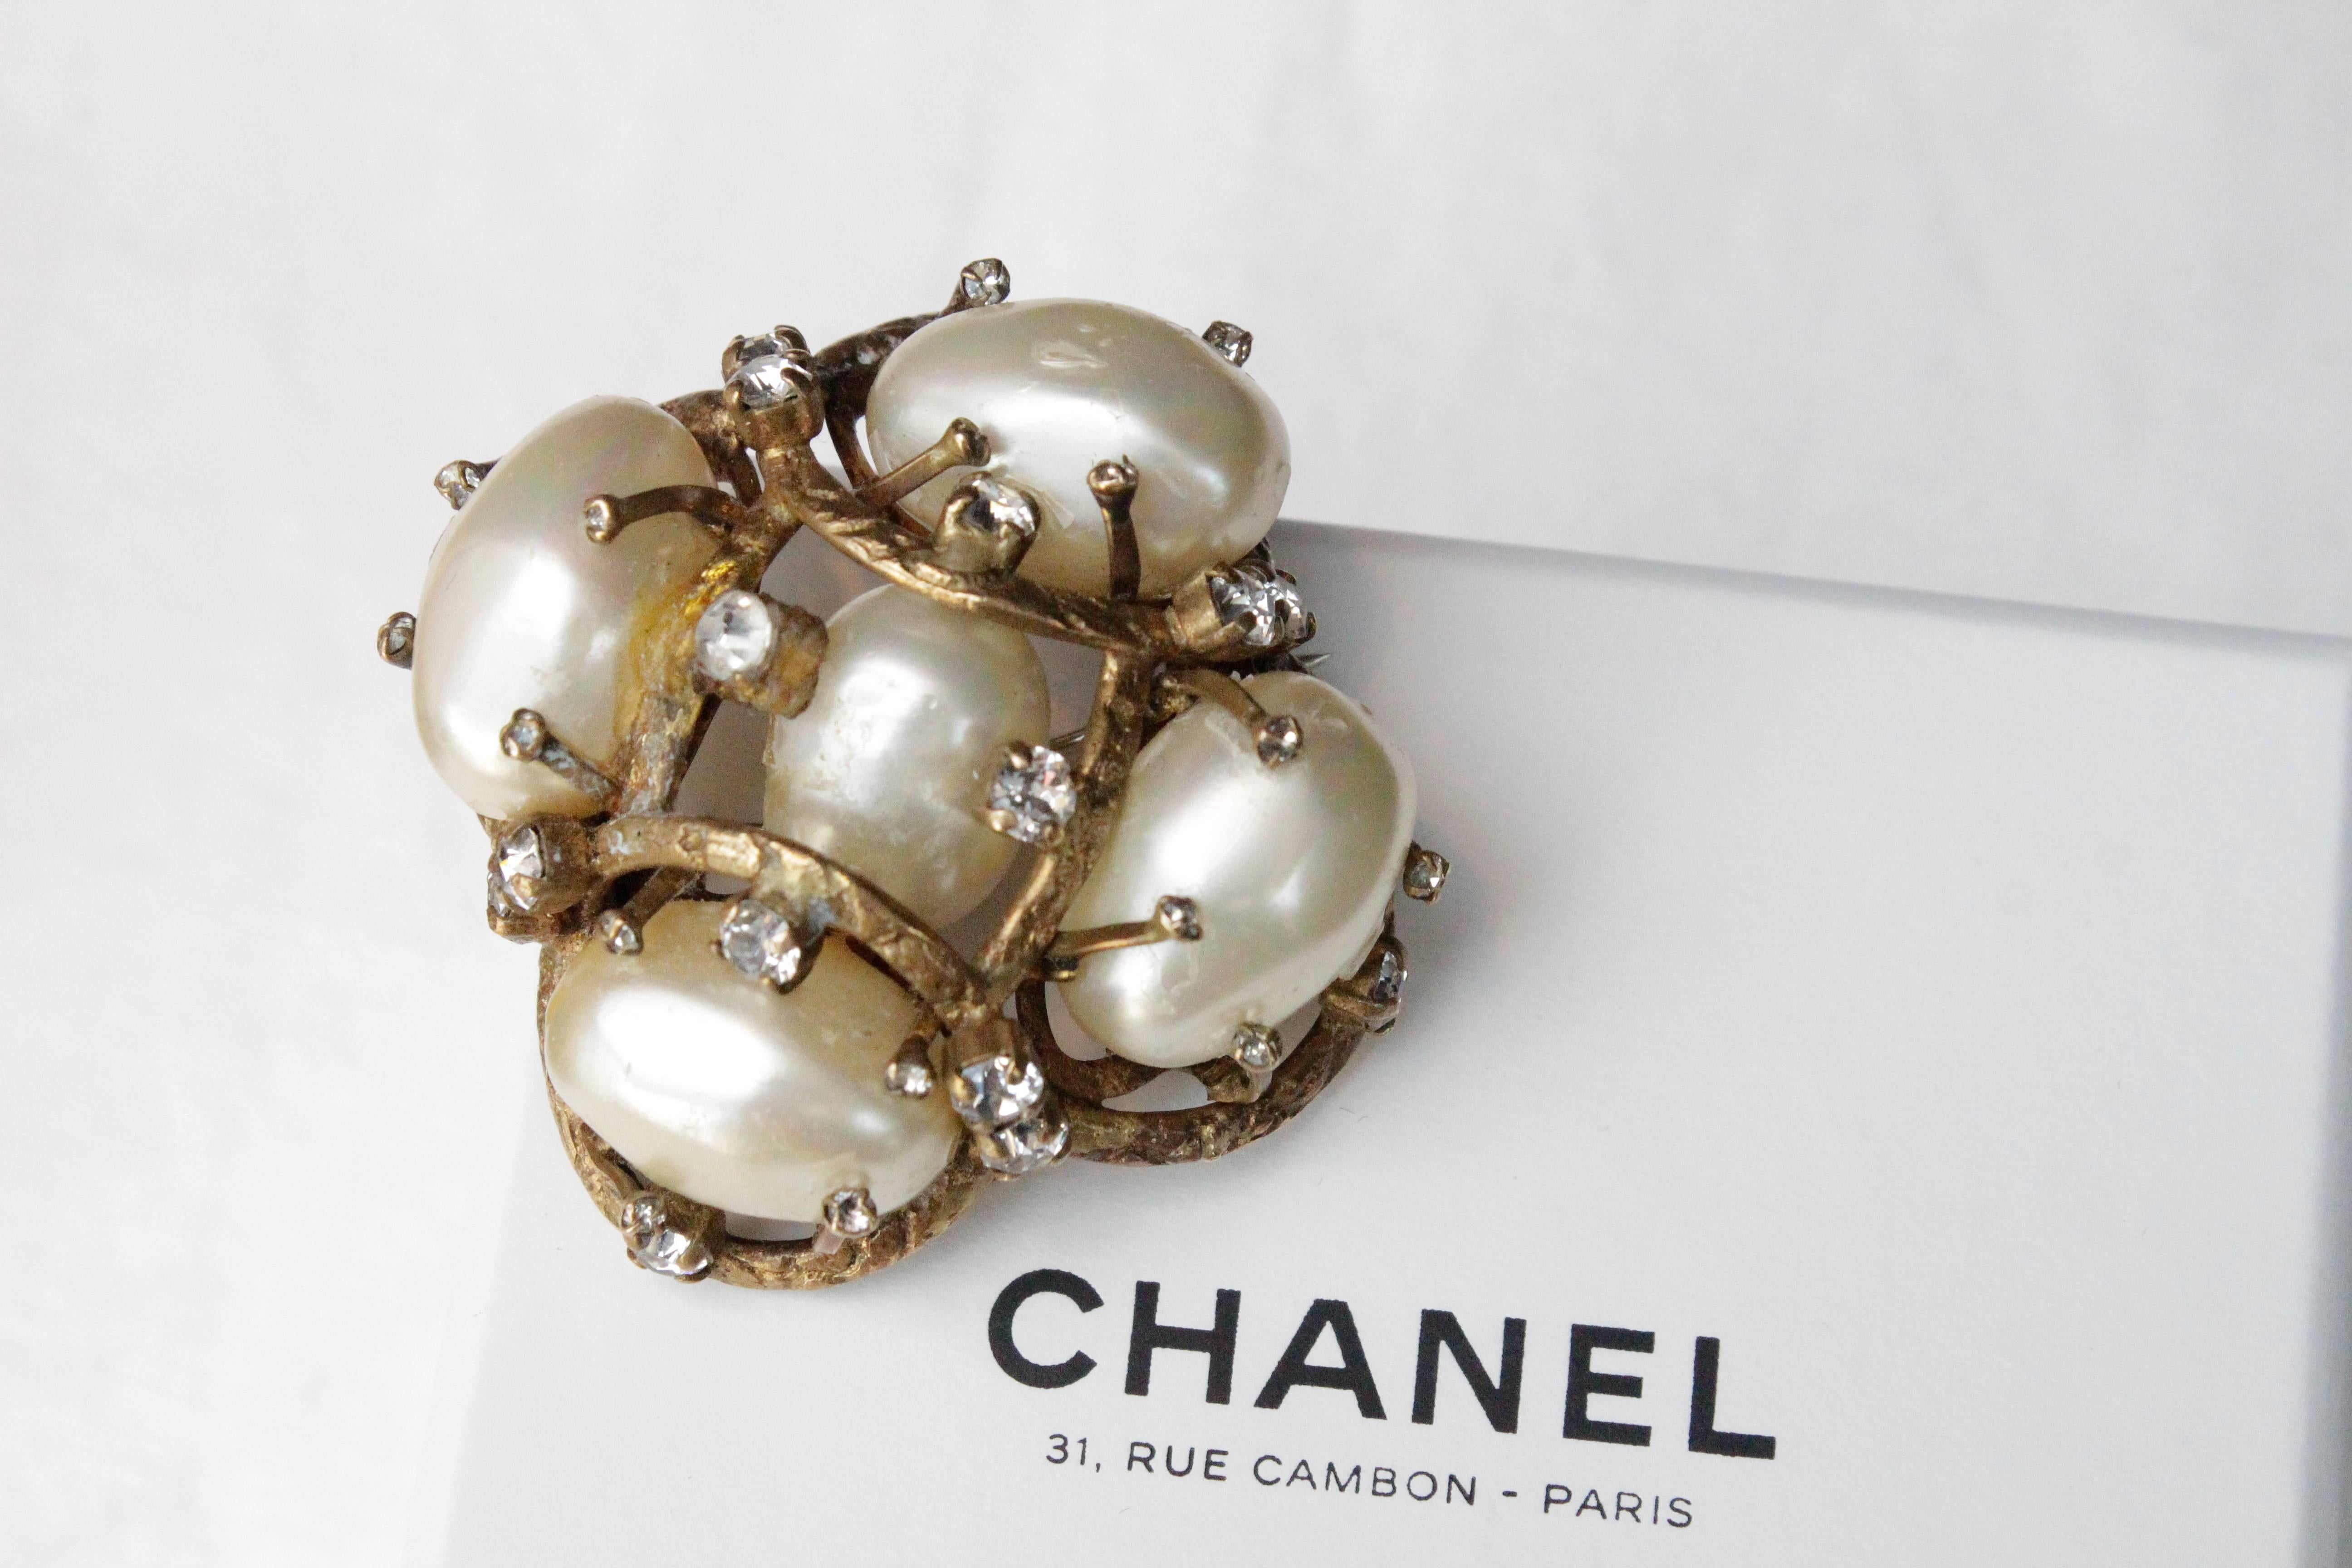 1955-1965s Chanel vintage brooch made of pearly beads and rhinestones  3